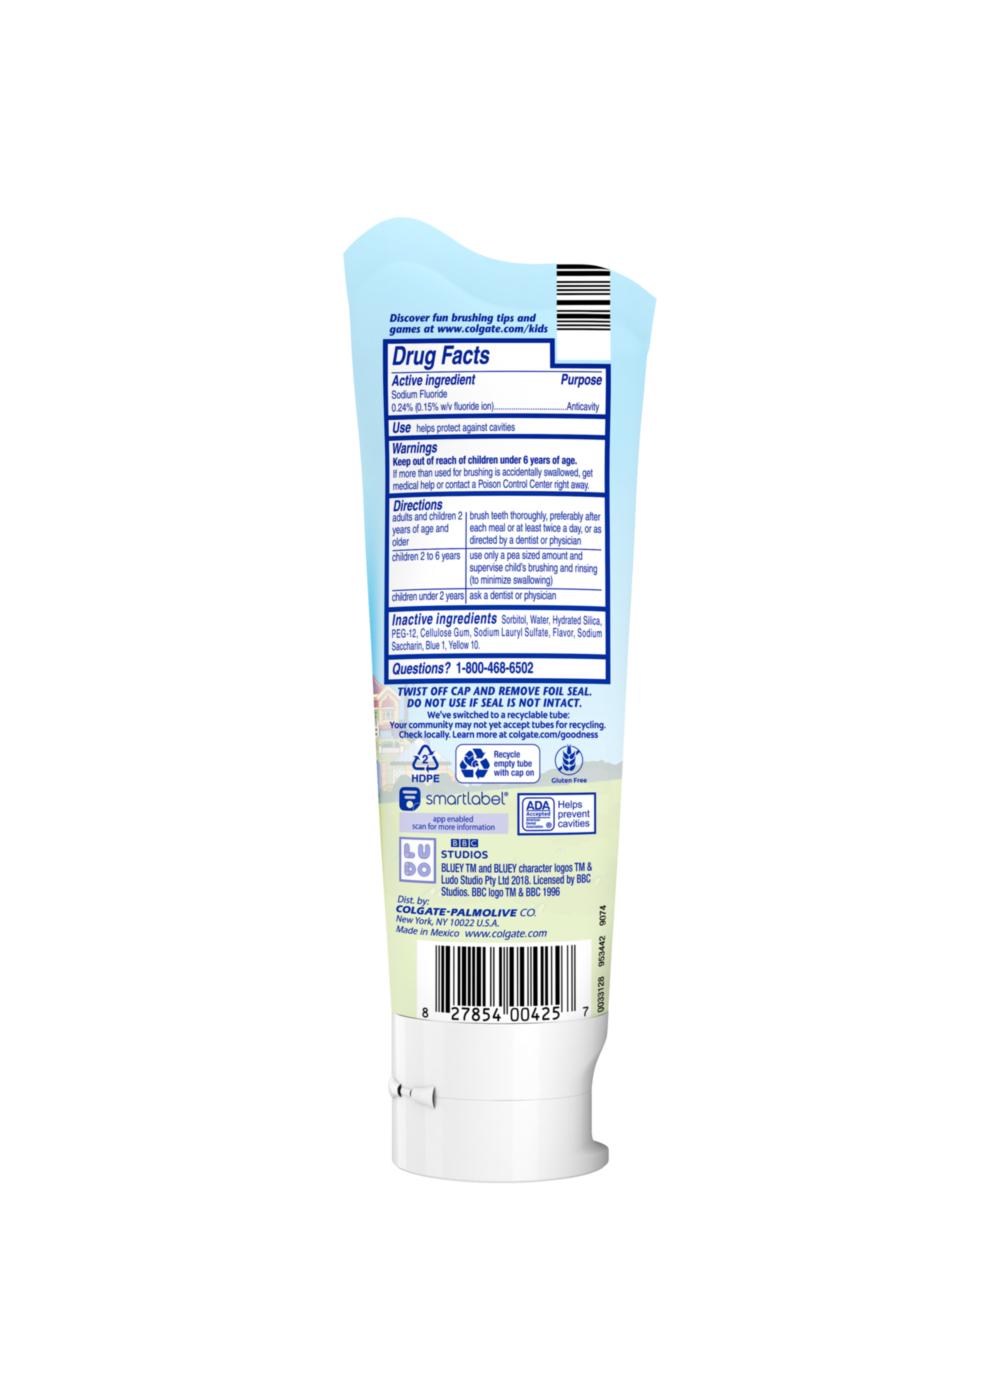 COLGATE Bluey Cavity Protection Toothpaste - Bubble Fruit; image 2 of 2